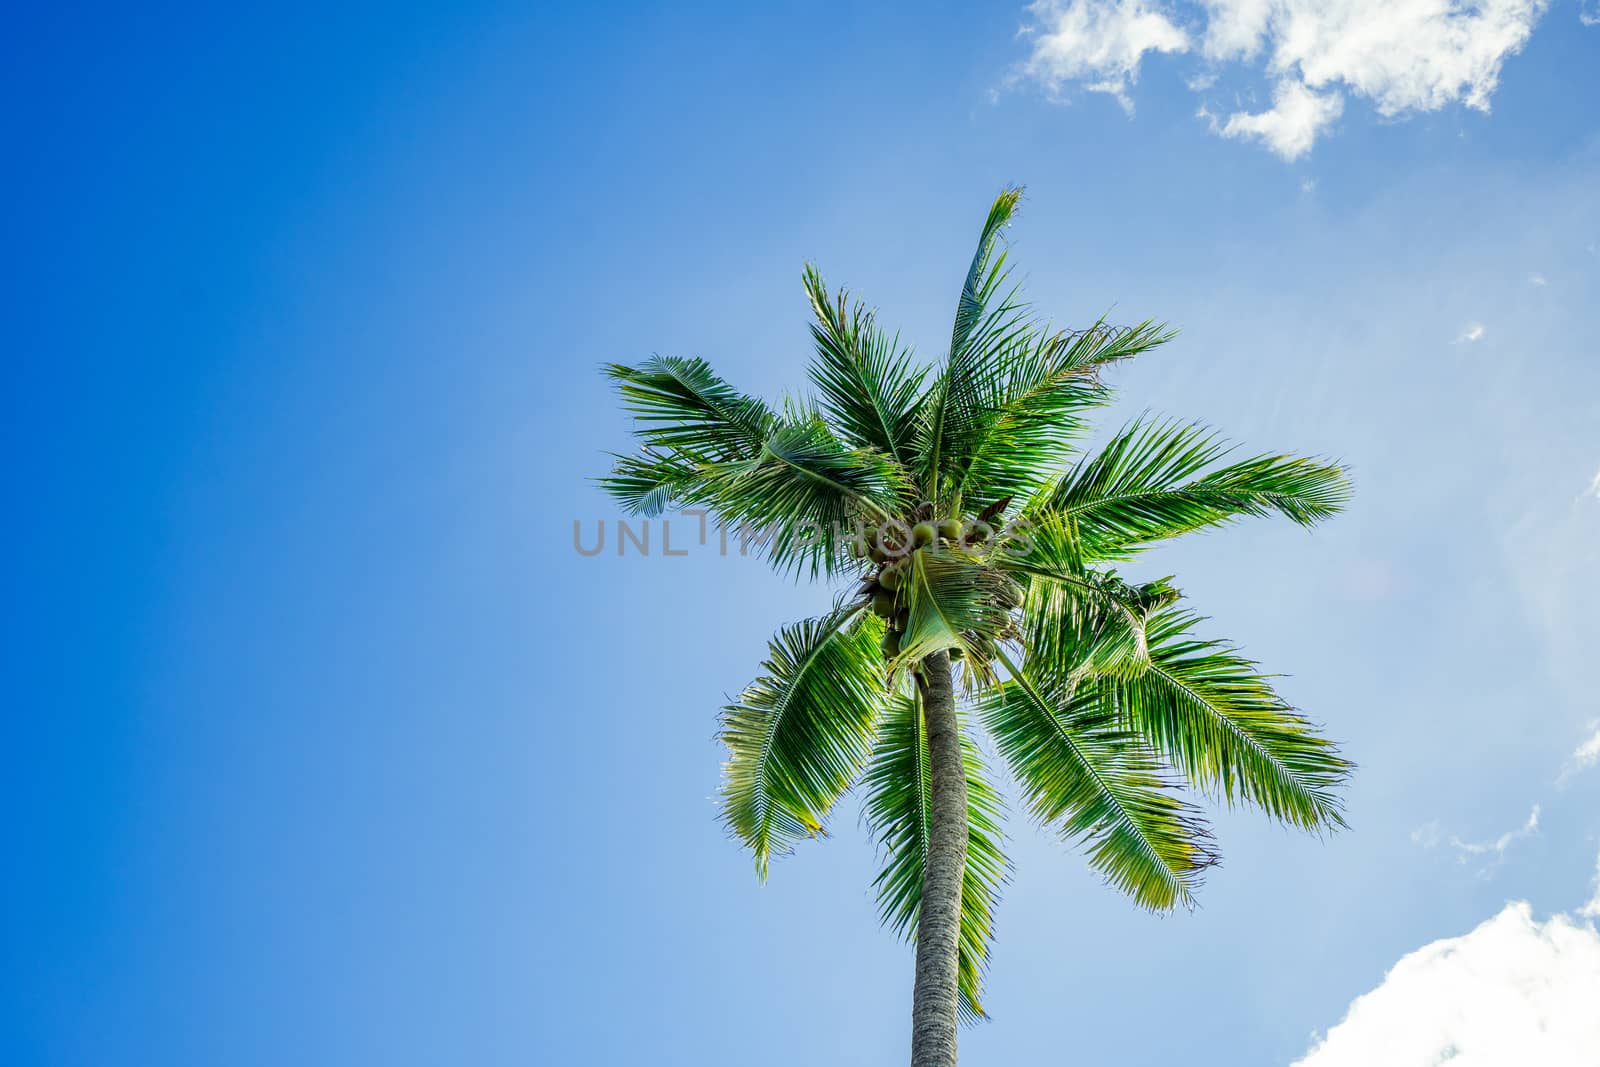 Coconut tree on blue sky and clouds background. Summer and beach concept.